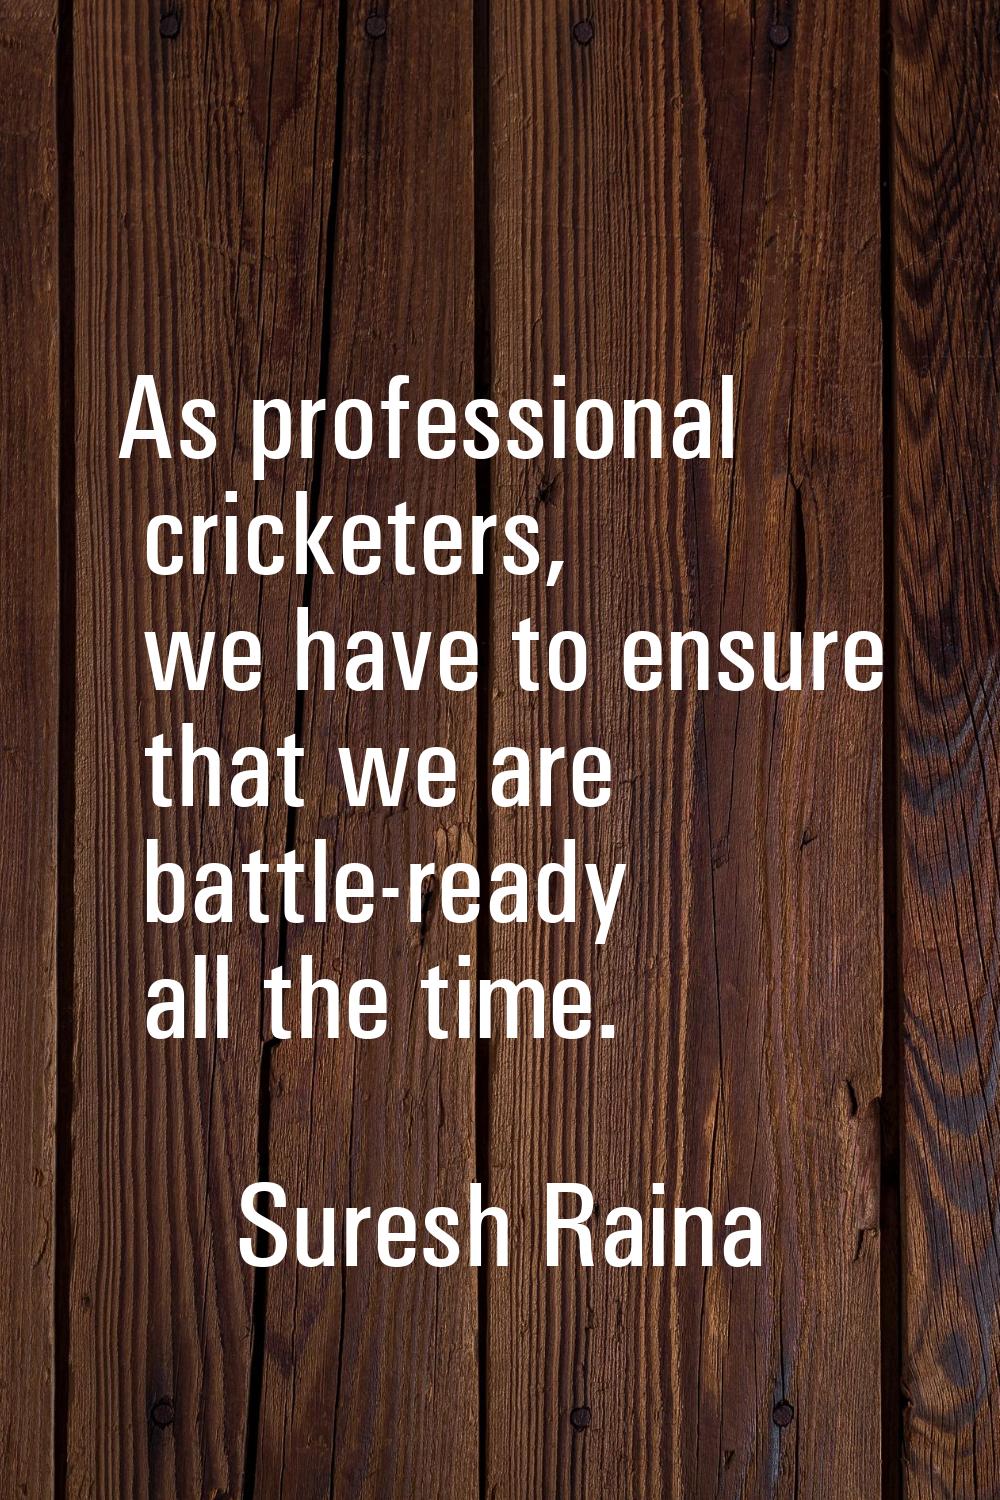 As professional cricketers, we have to ensure that we are battle-ready all the time.